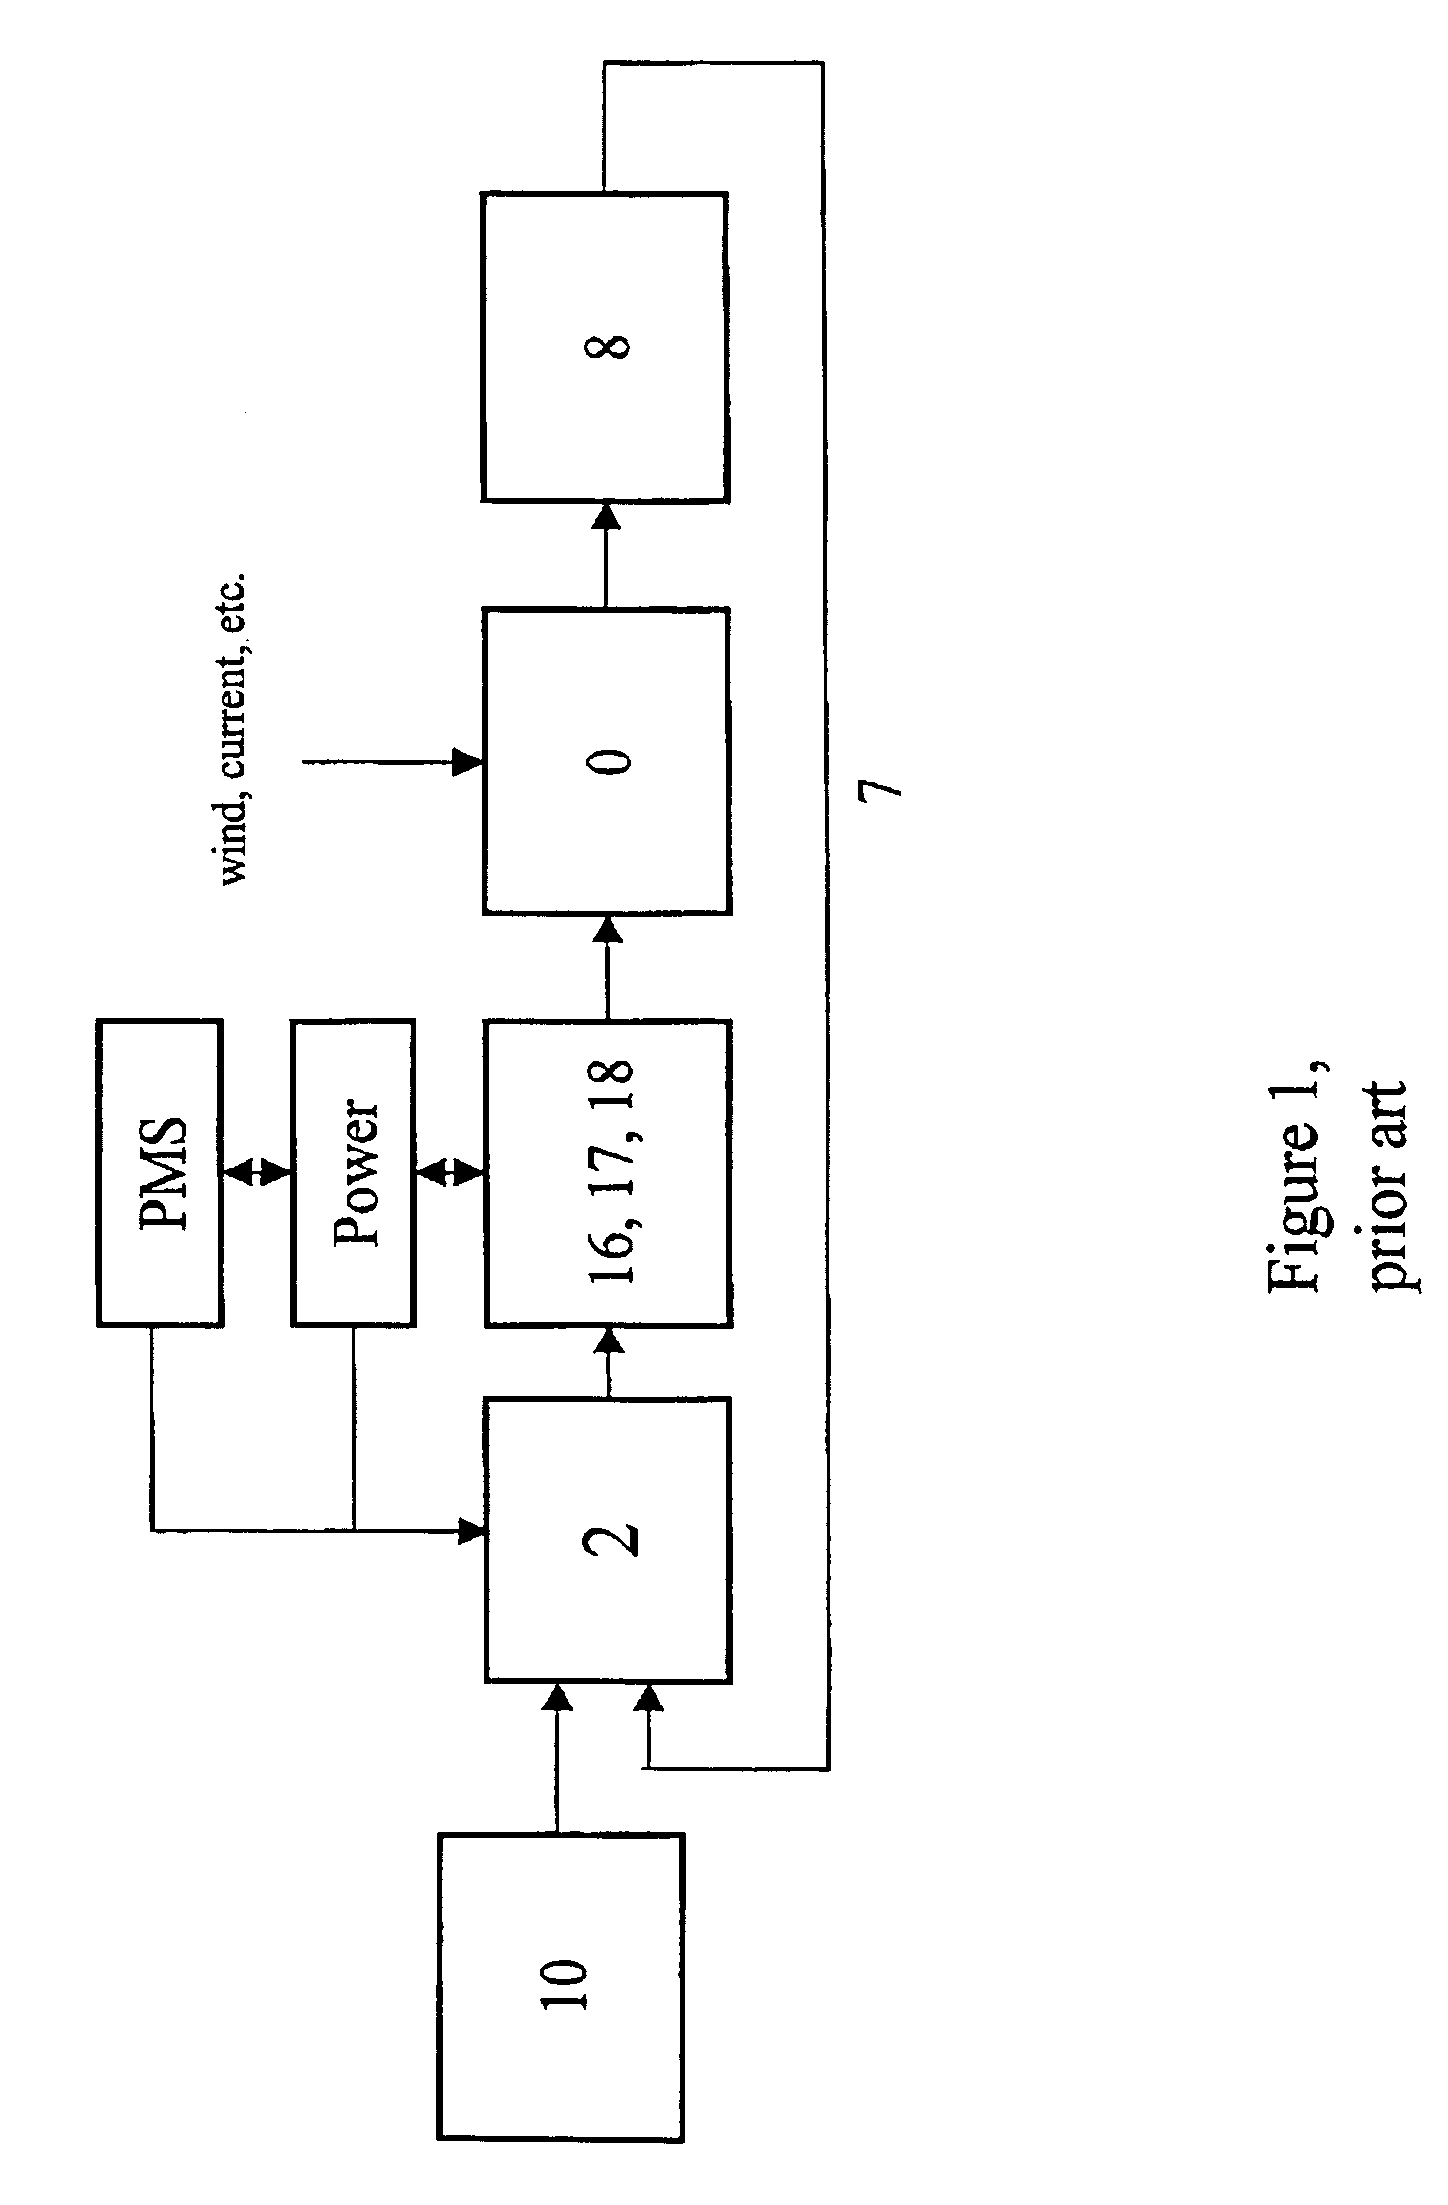 Test method and system for dynamic positioning systems